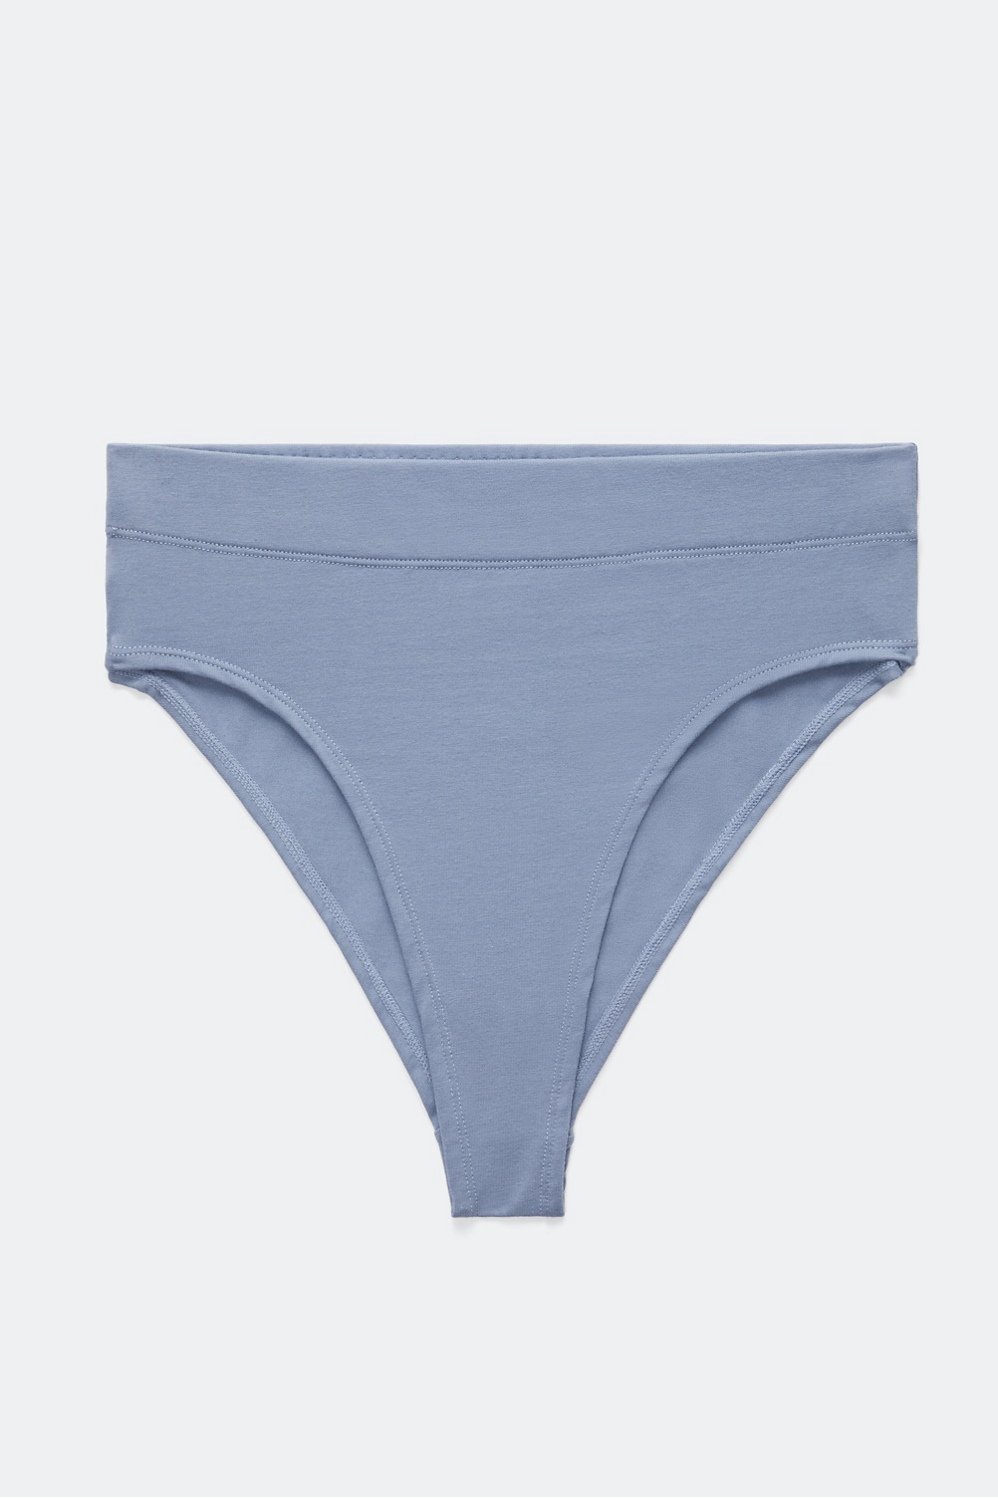 Buy Cotton Polyester Panty online